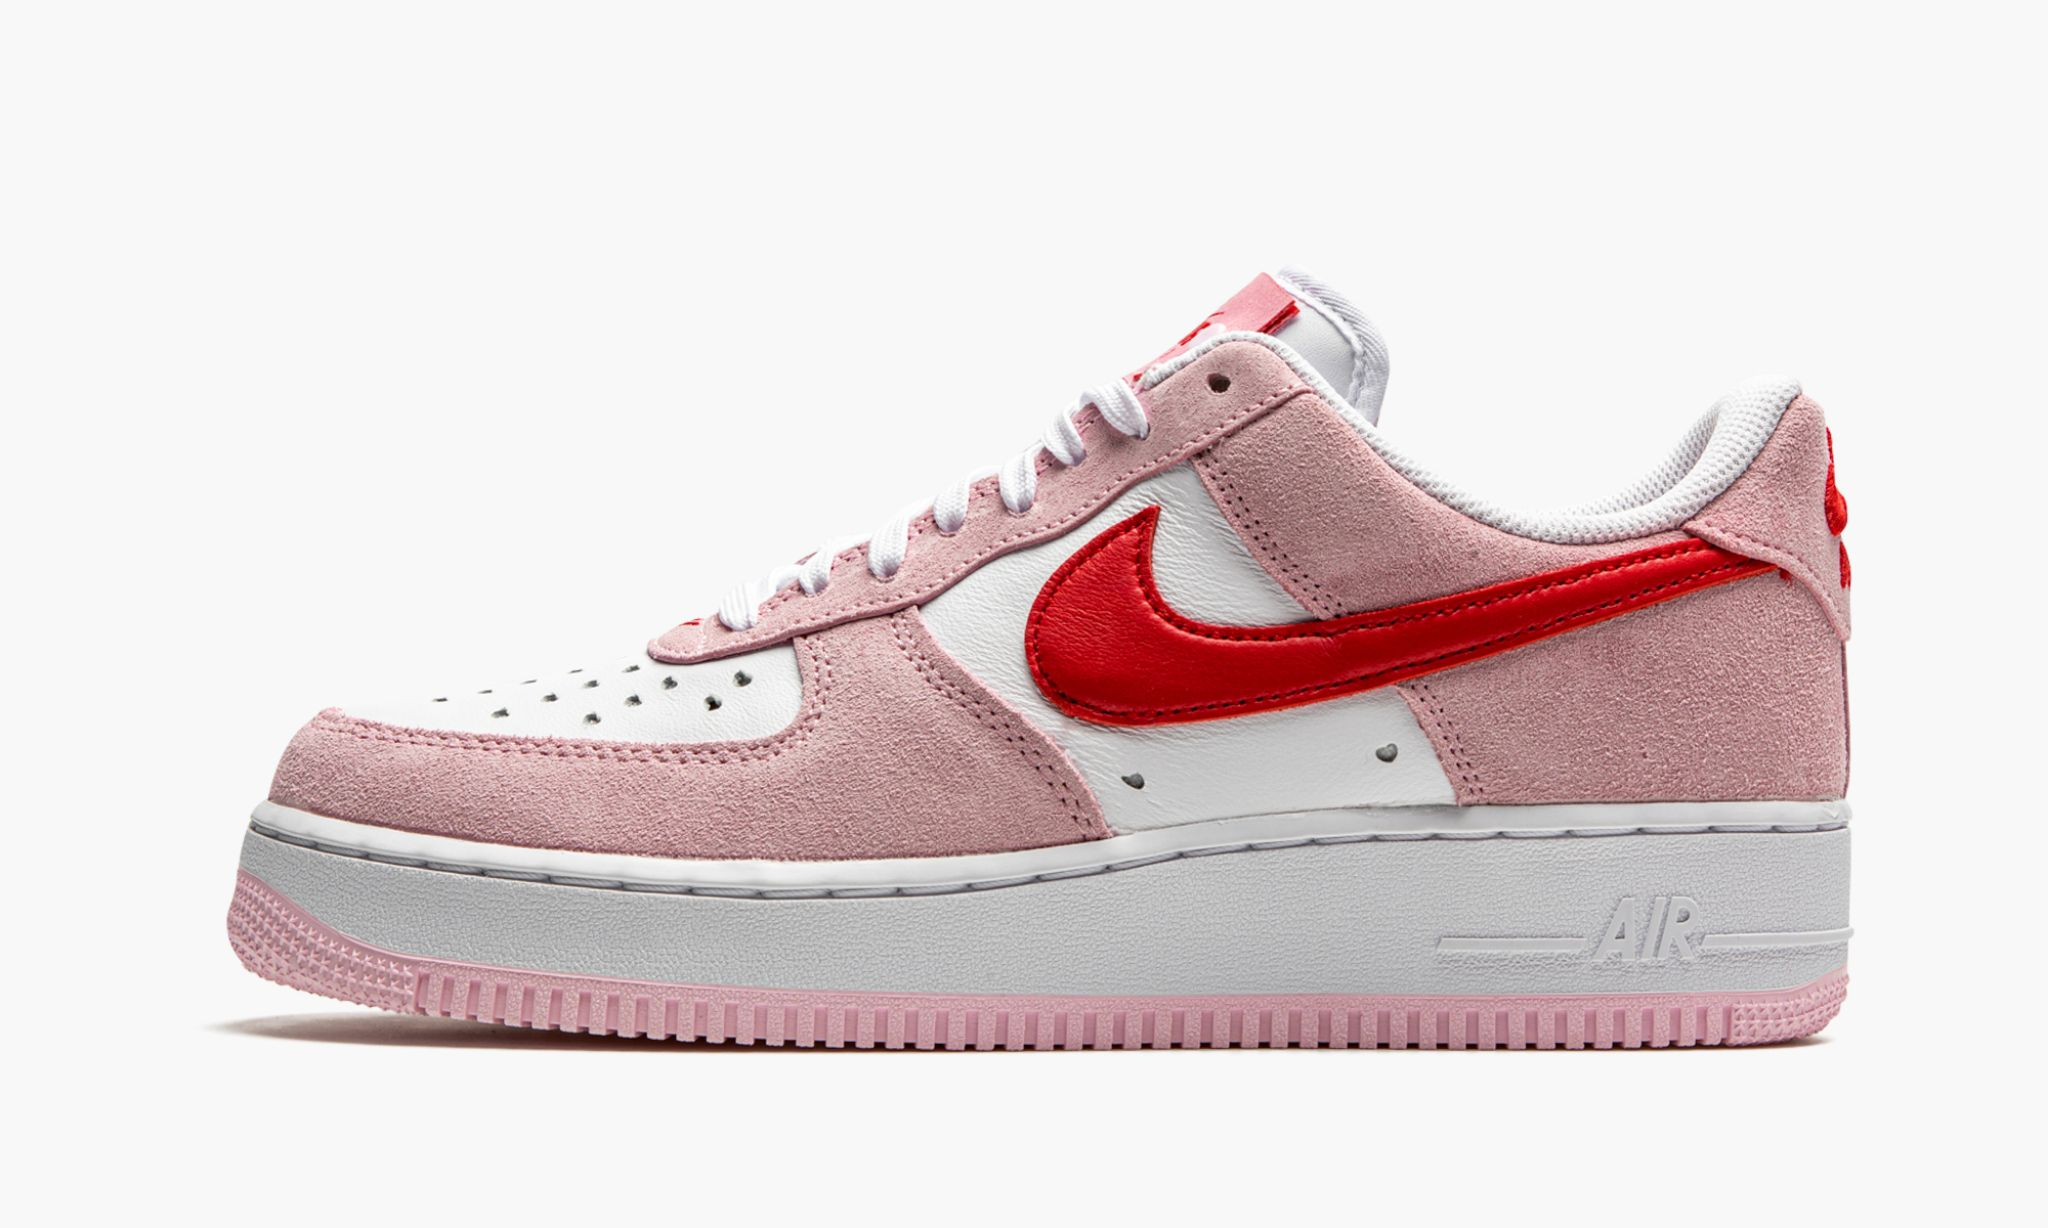 Air force 1 low valentine s day. Nike Air Force Valentines Day 2021. Nike Air Force 1 07. Nike Air Force 1 Low Valentines Day. Nike Air Force 1 Low.